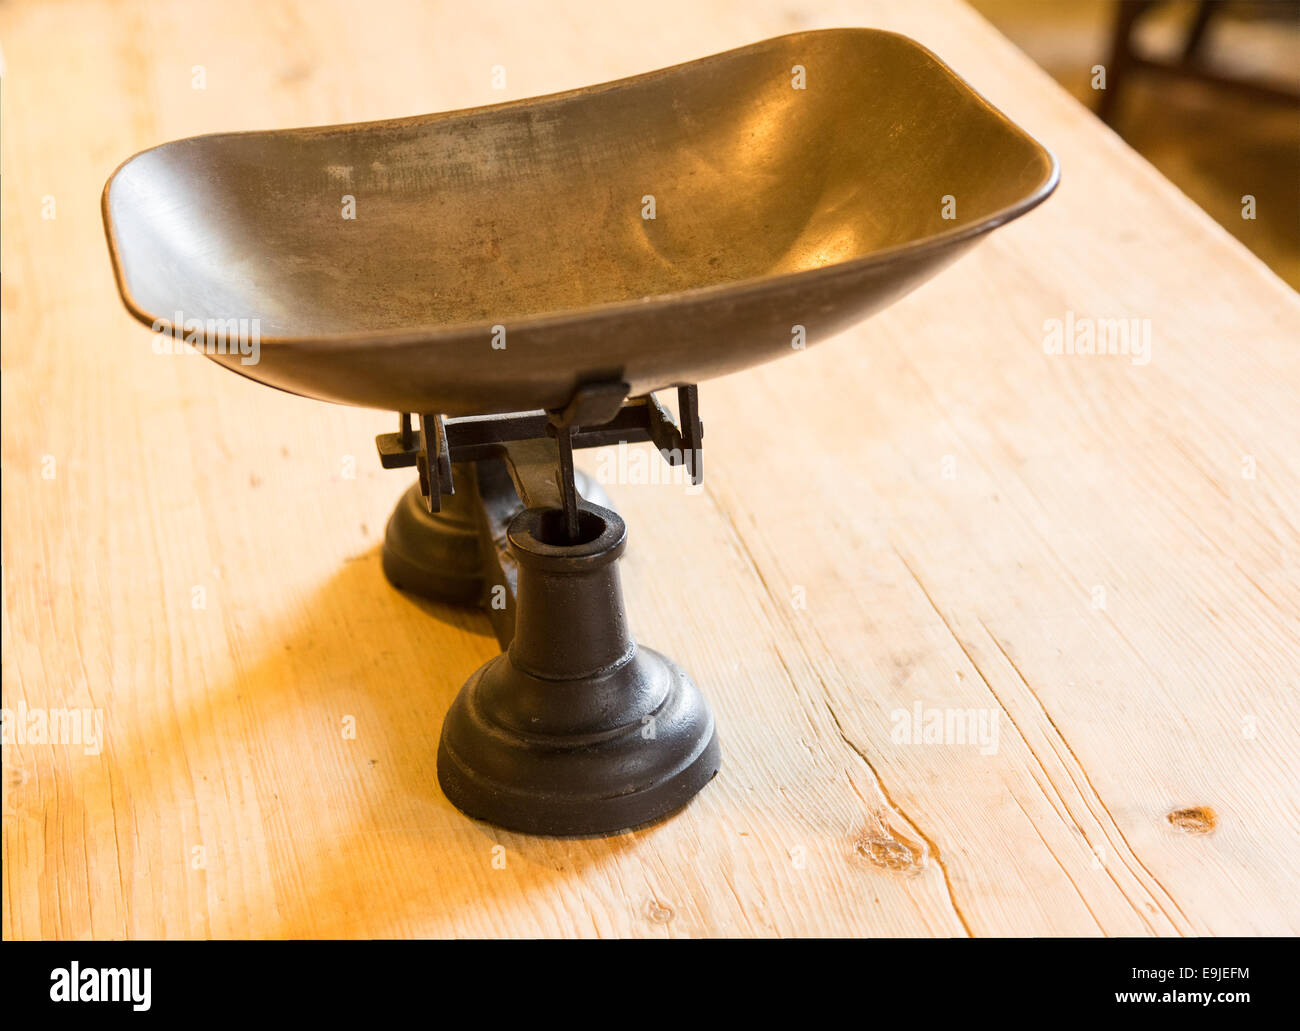 Kitchen weigh scales on table Stock Photo